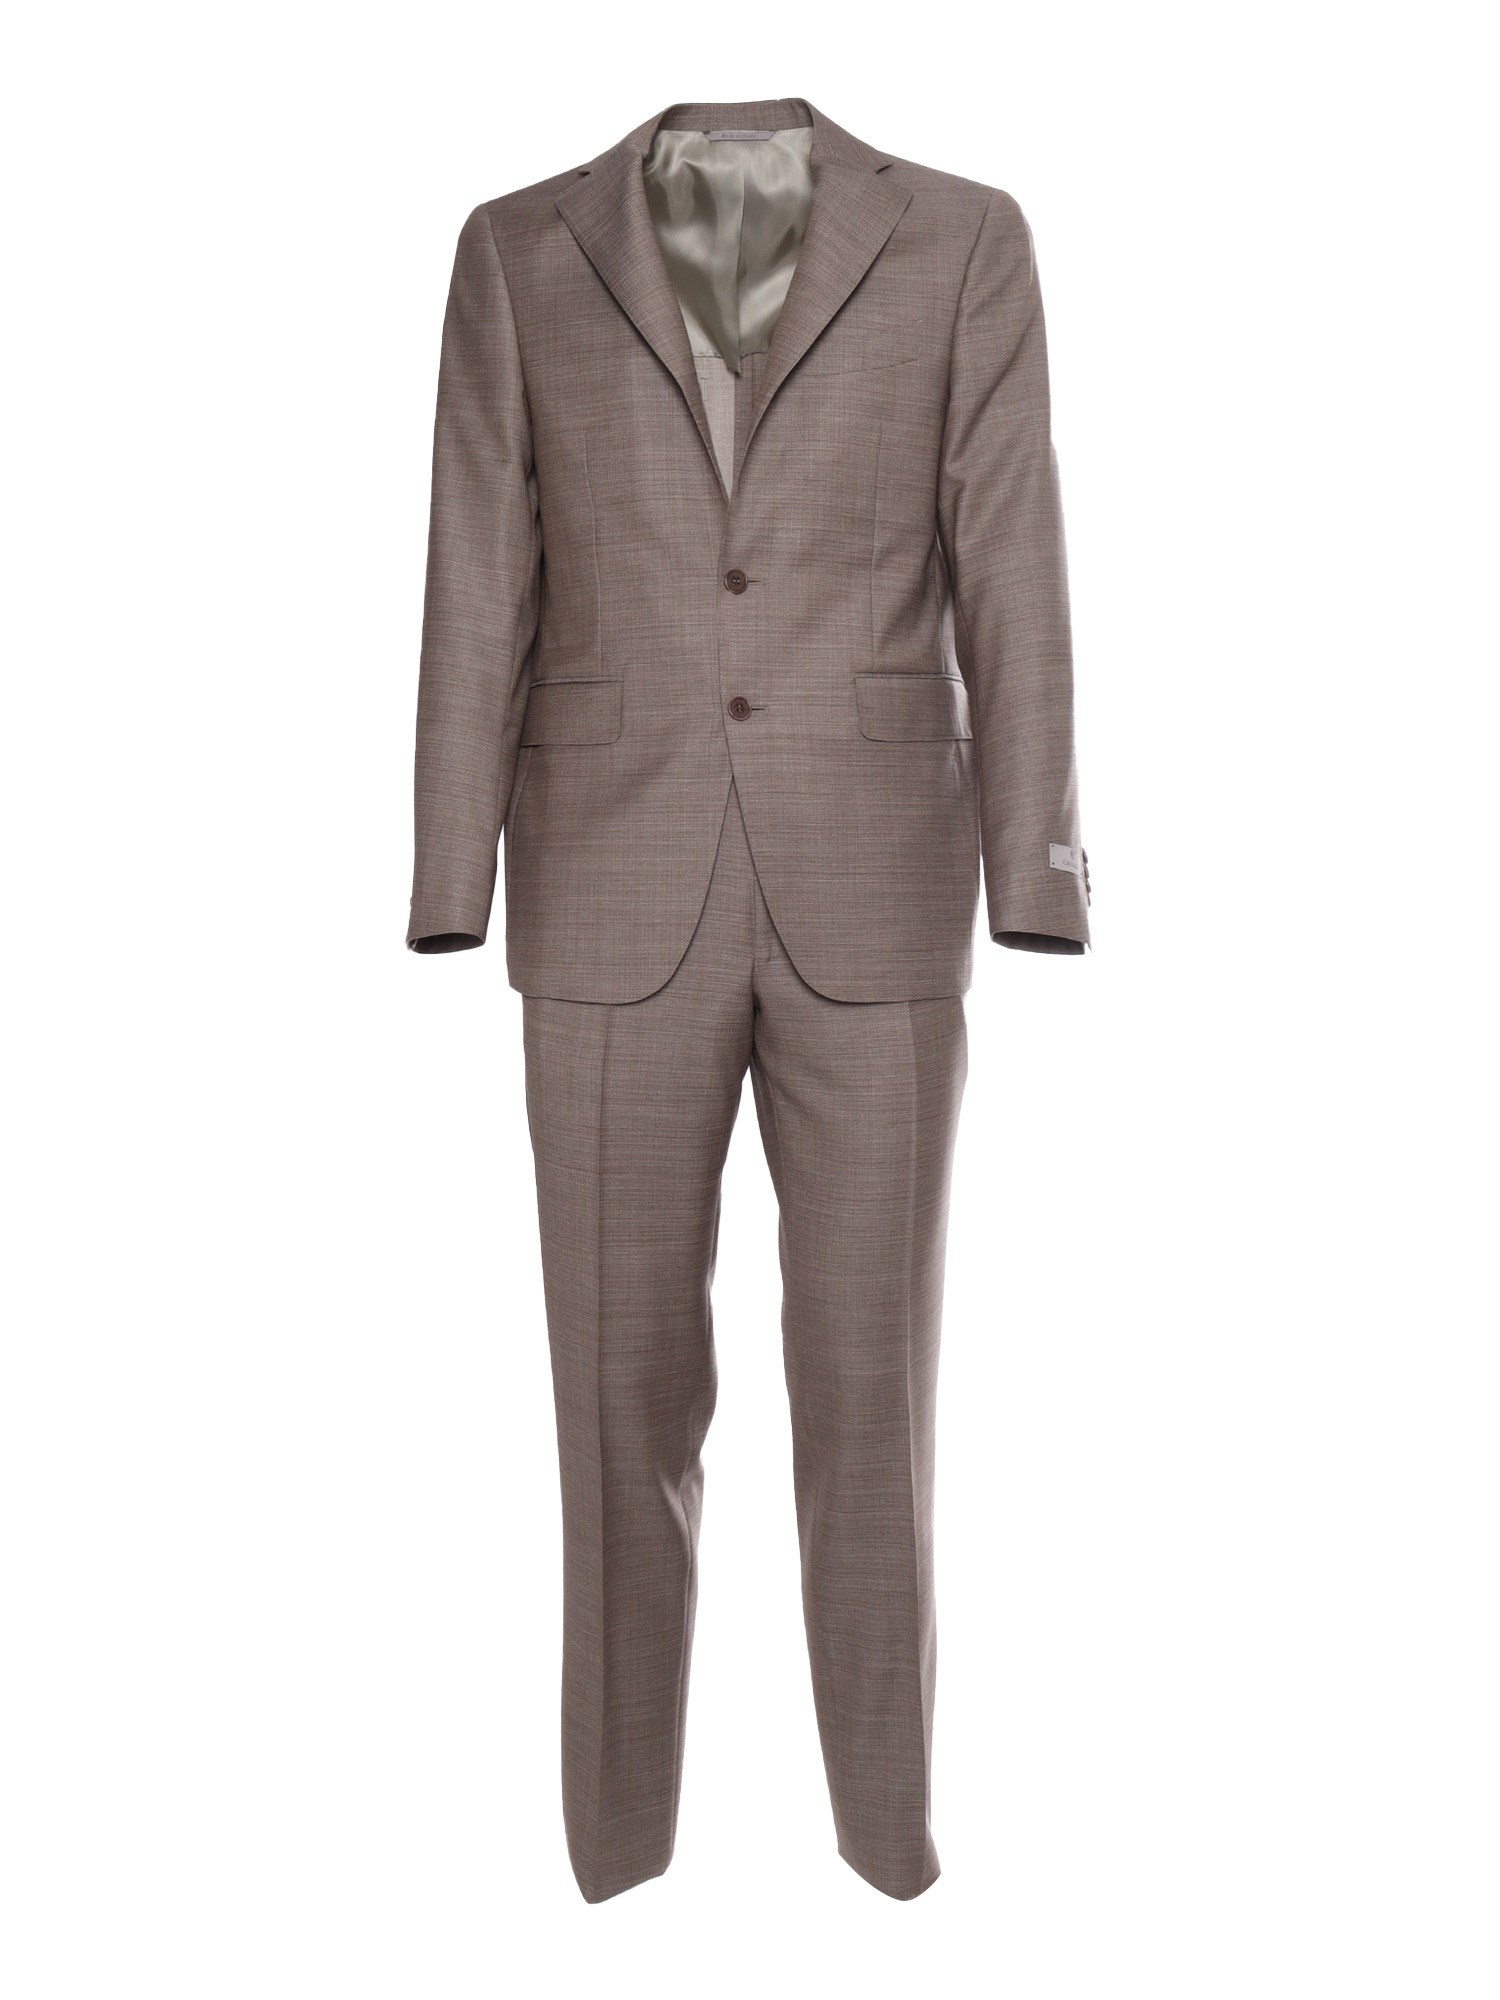 CANALI SINGLE-BREASTED SUIT 25280/51 AA02524703